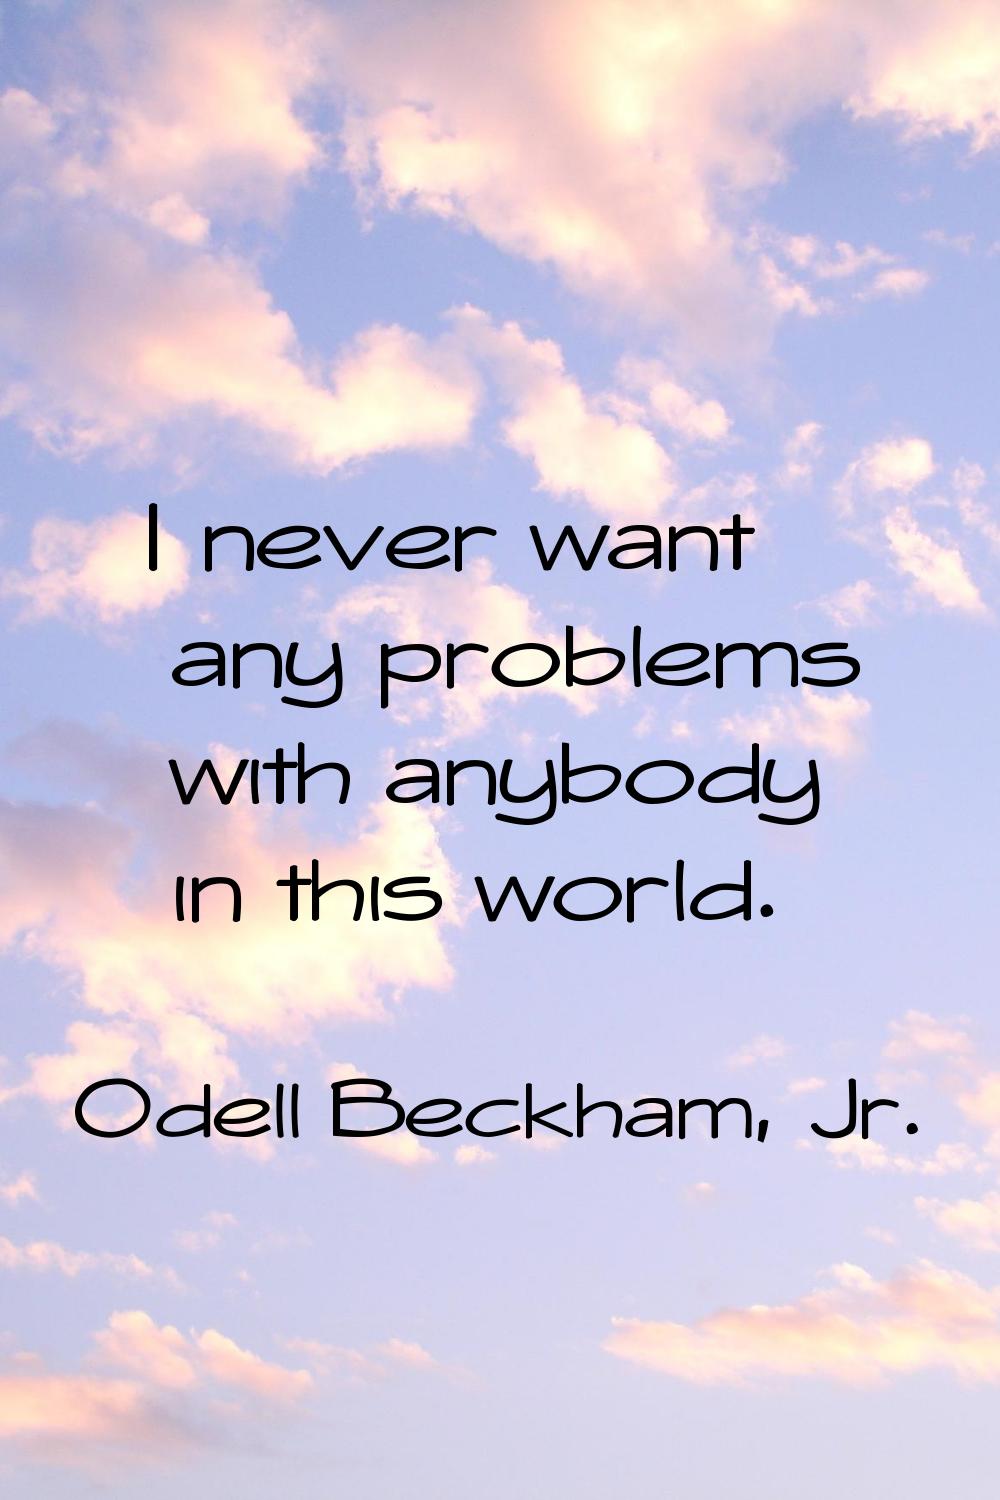 I never want any problems with anybody in this world.